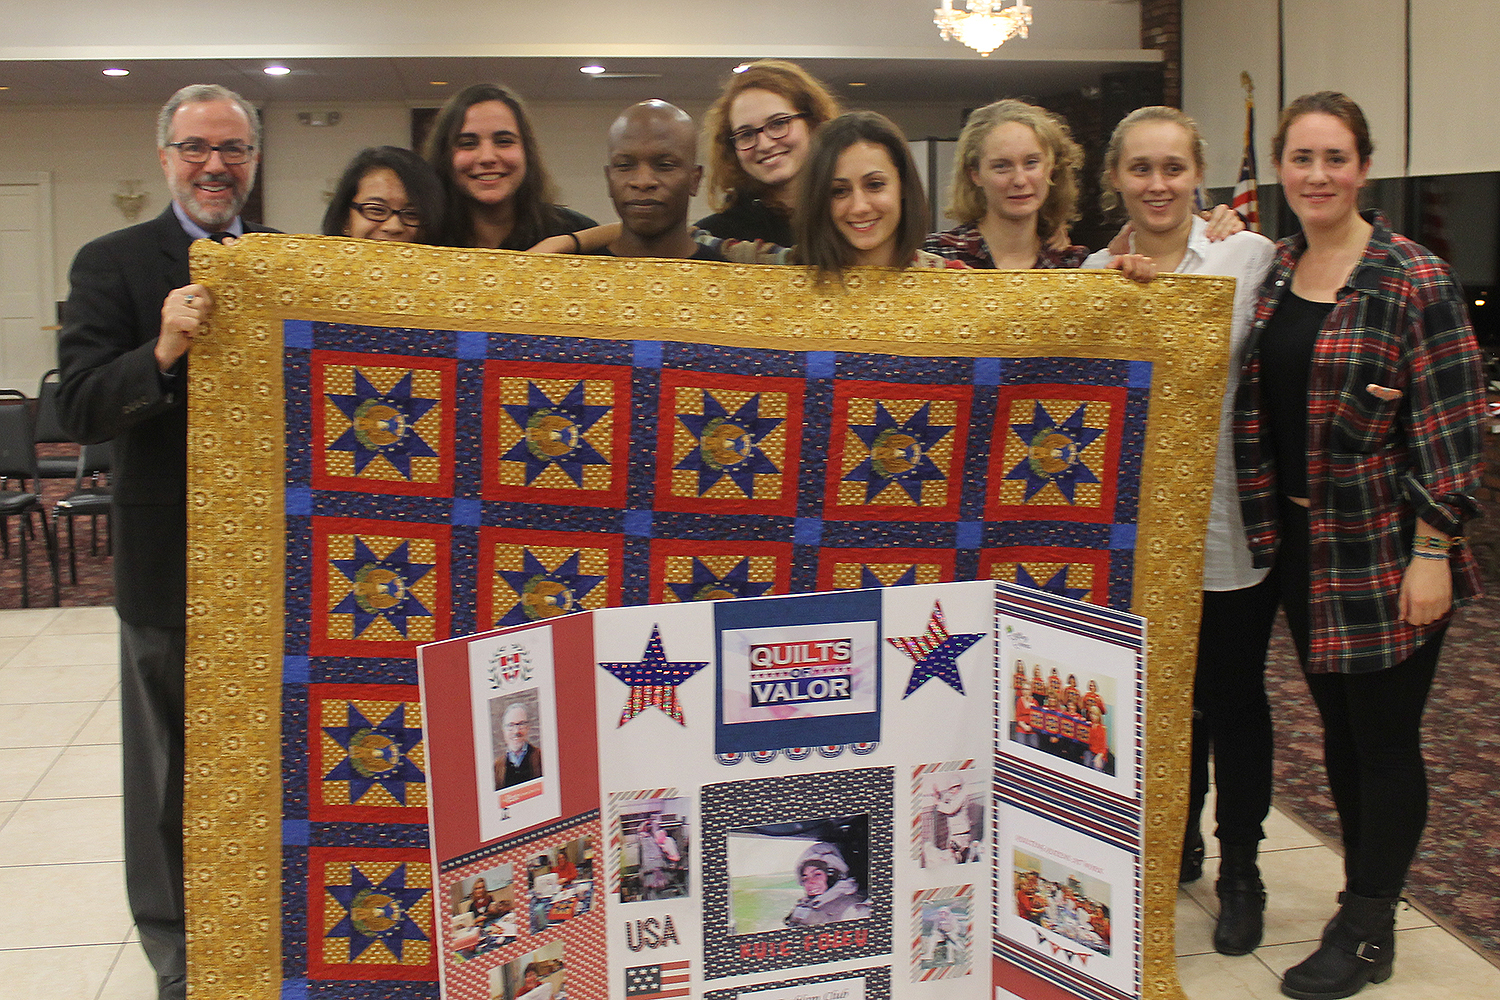 Kyle Foley '18 received a Quilt of Valor Dec. 3 at the Emblem Club in Middletown. She's pictured here with several Wesleyan students and at left, Professor Andy Szegedy-Maszak.